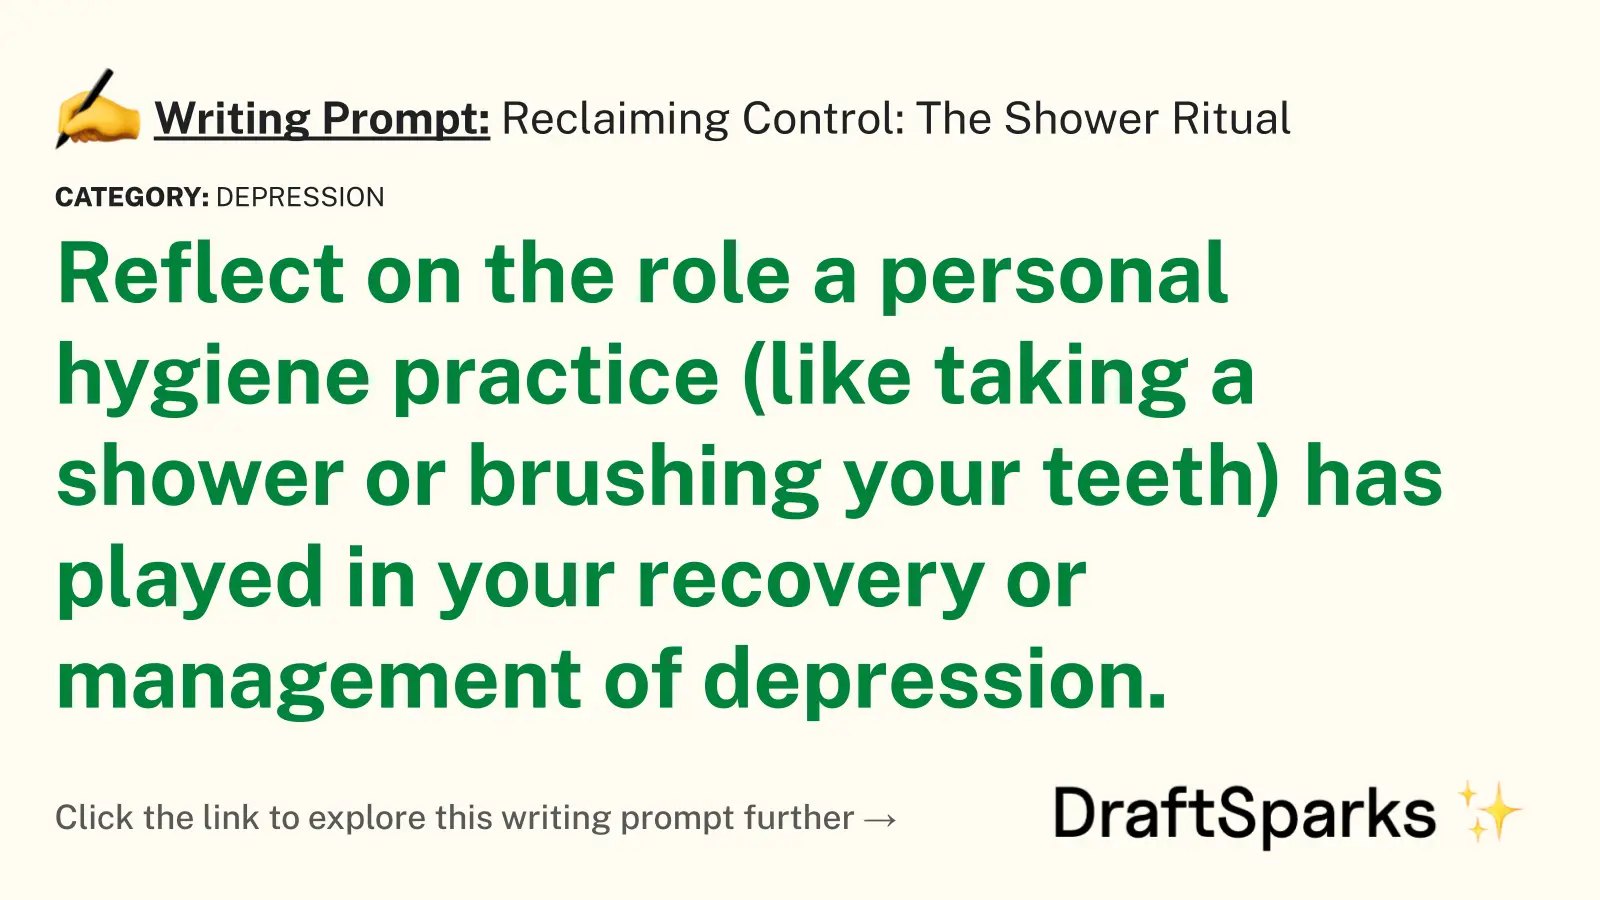 Reclaiming Control: The Shower Ritual